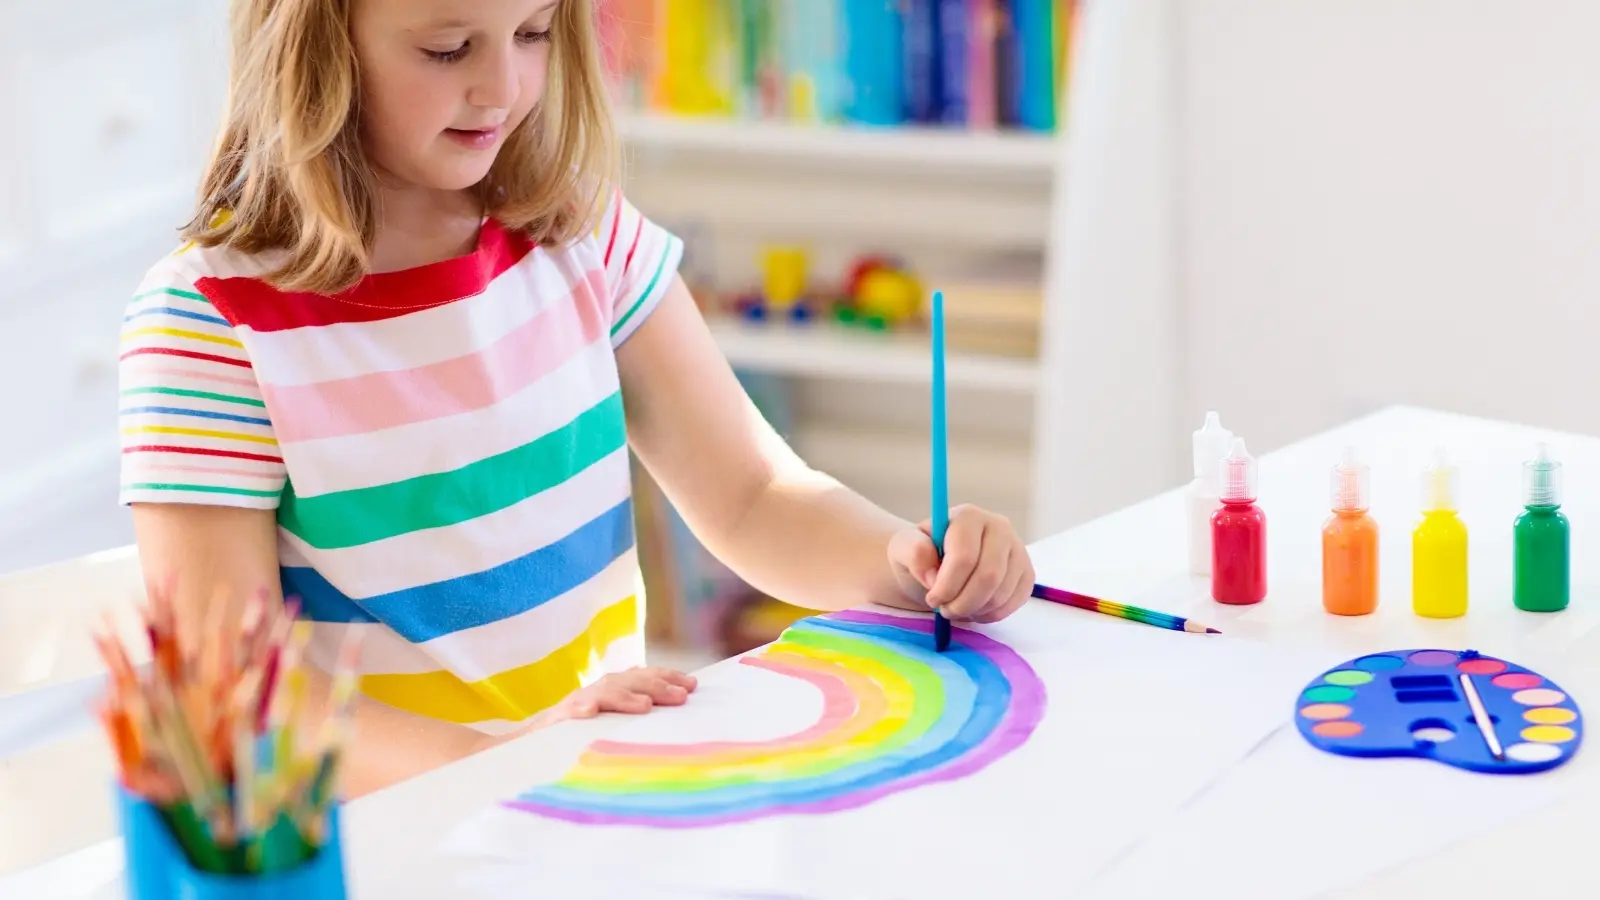 Our favorite art supplies for kids: The best supplies for creative activities at home